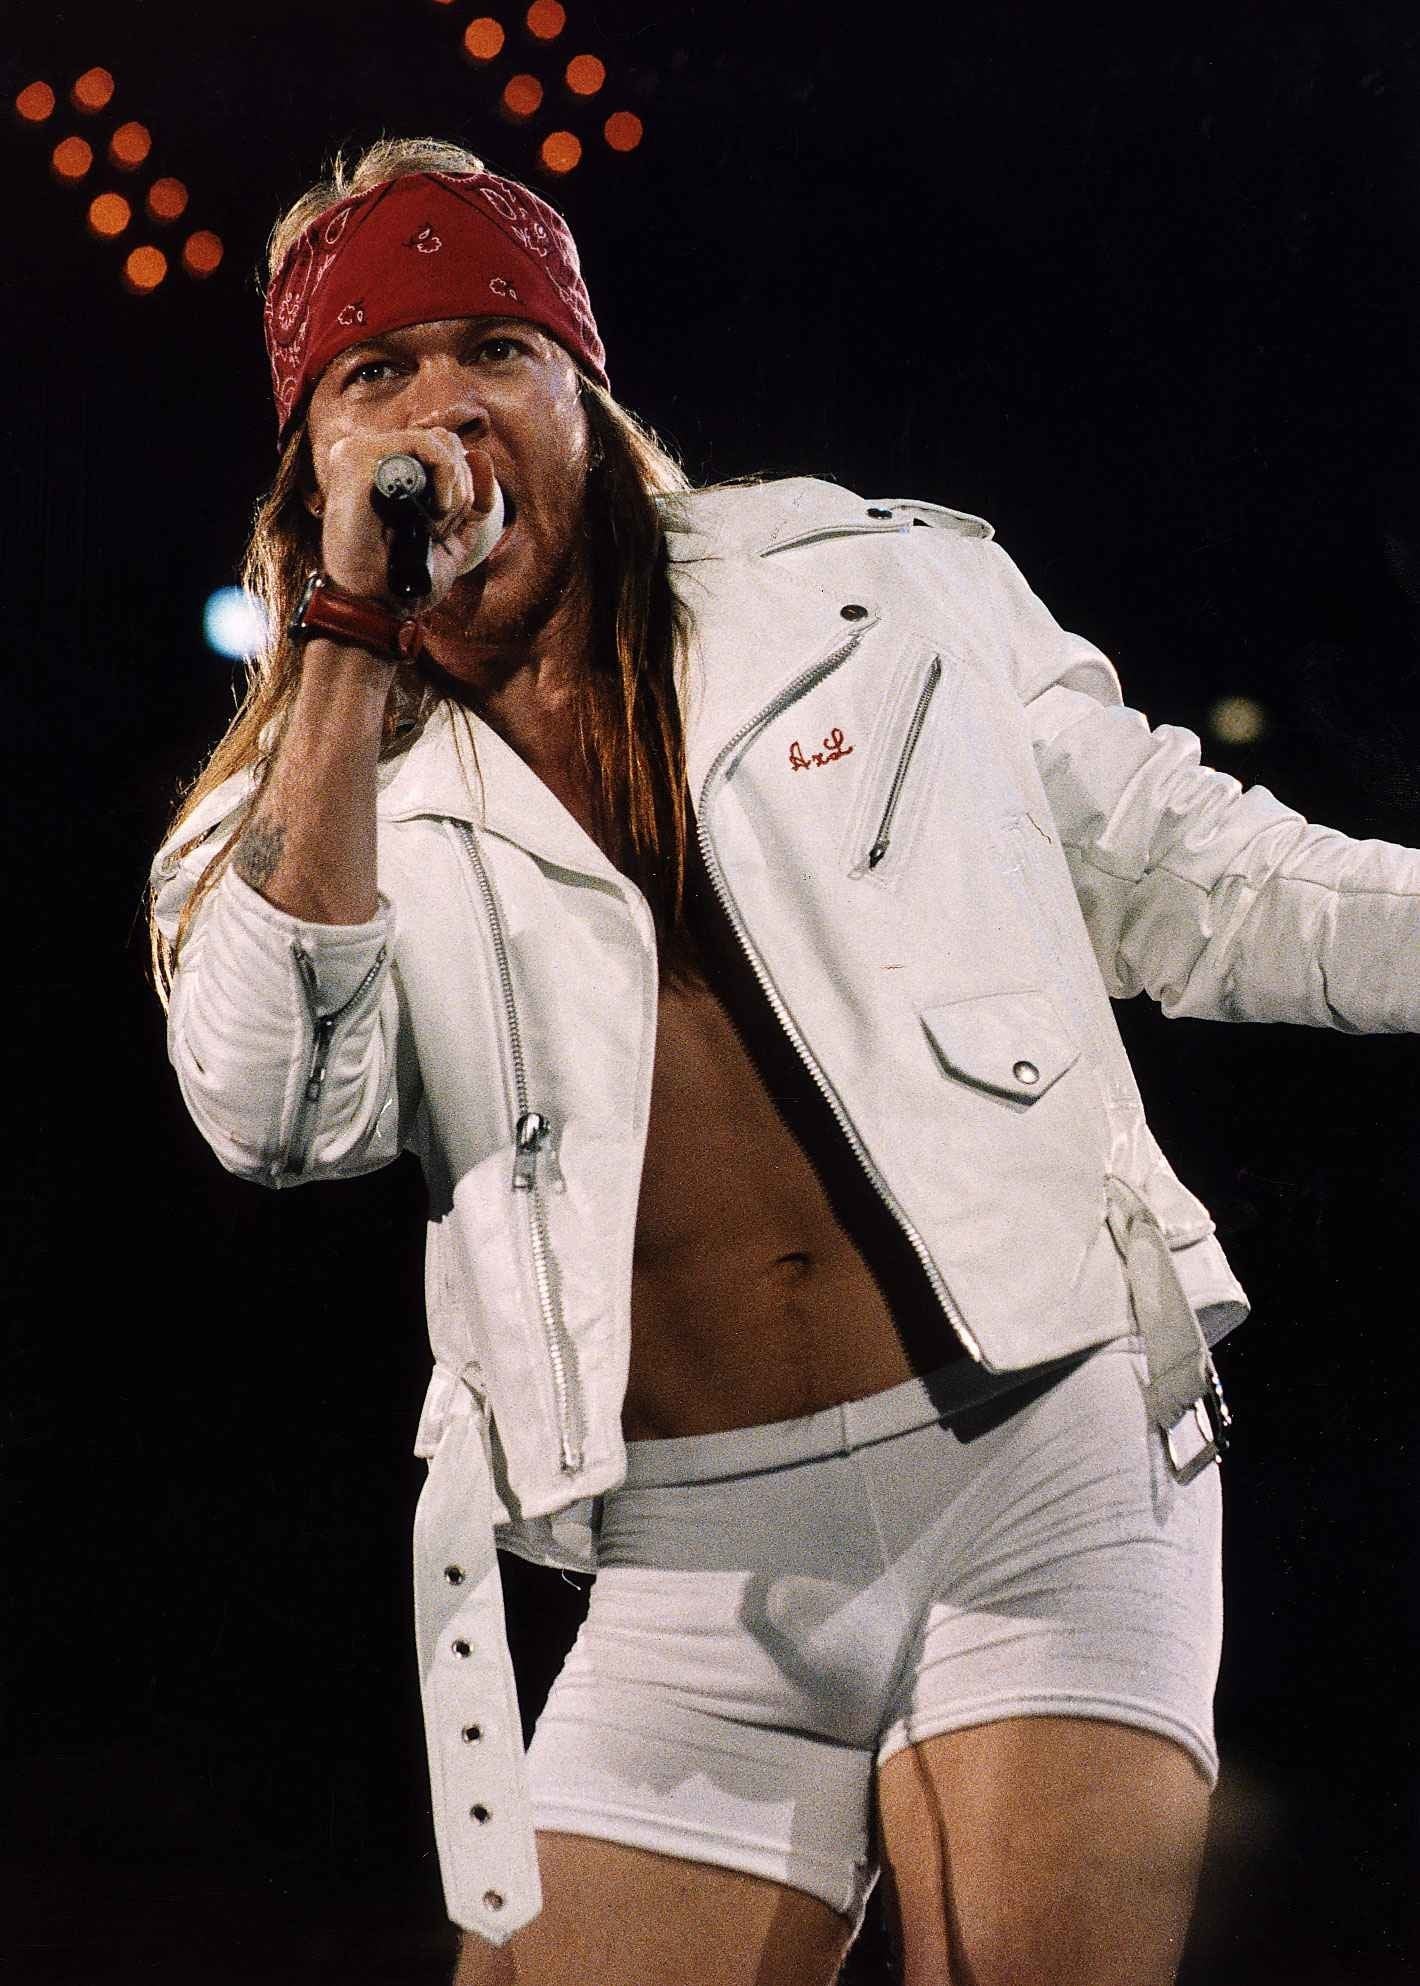 Guns N' Roses - Axl Rose On Stage In Briefs at Wembley Arena, England, 1992 Poster